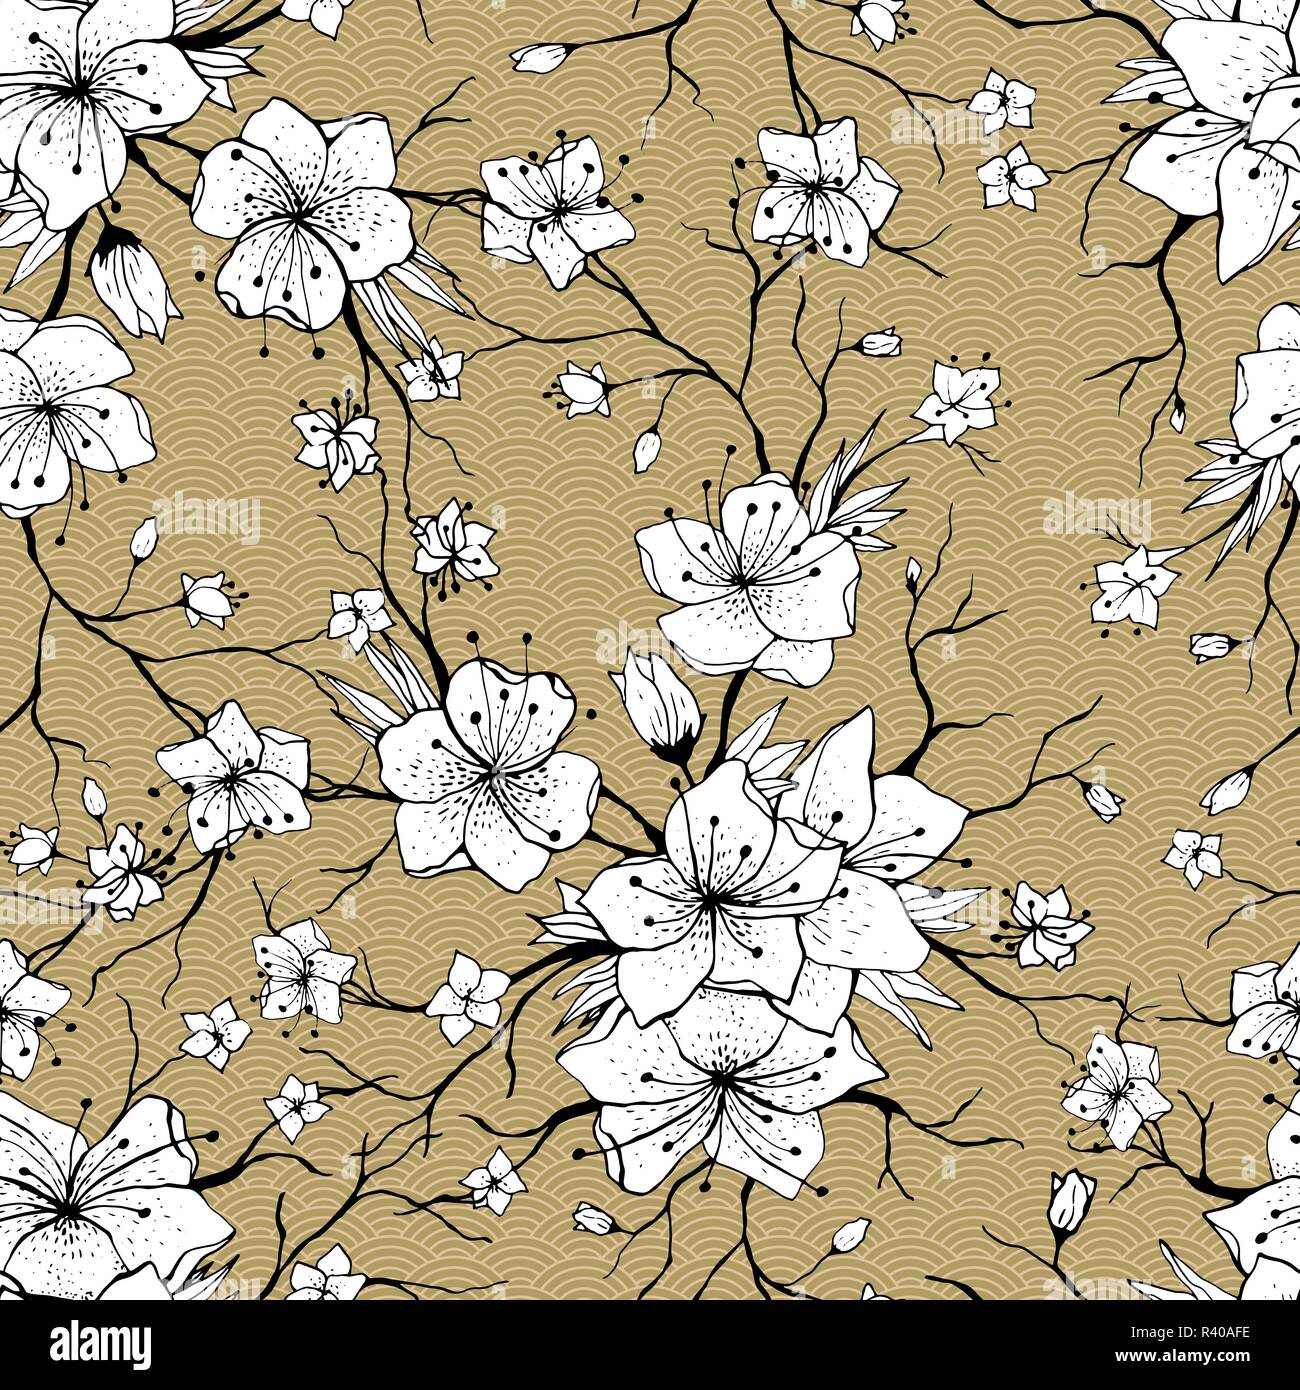 Sakura branches seamless pattern. Japanese Cherry abstract texture. Apple tree twigs with flowers and buds. Cherry blossom Golden background. Stock Vector